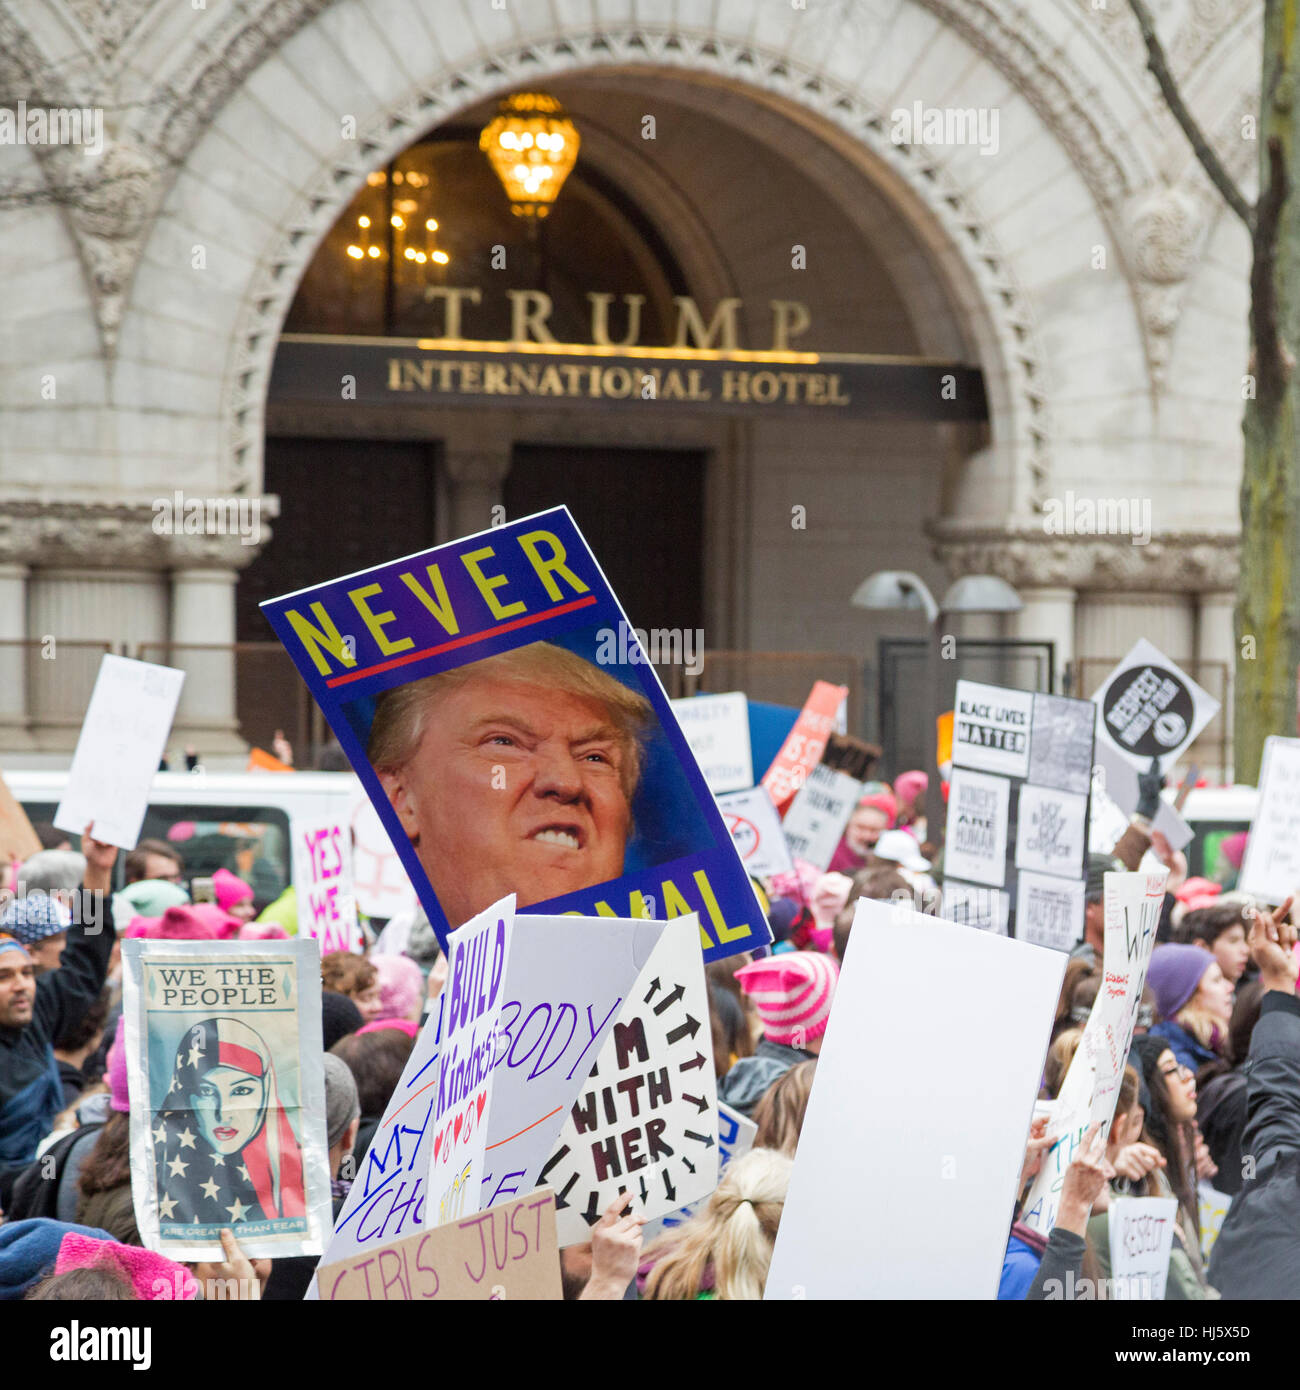 Washington, DC USA - 21 January 2017 - The Women's March on Washington drew an estimated half million to the nation's capitol to protest President Donald Trump. It was a far larger crowd than had witnessed his inauguration the previous day. Marchers passed the Trump International Hotel near the White House. Credit: Jim West/Alamy Live News Stock Photo